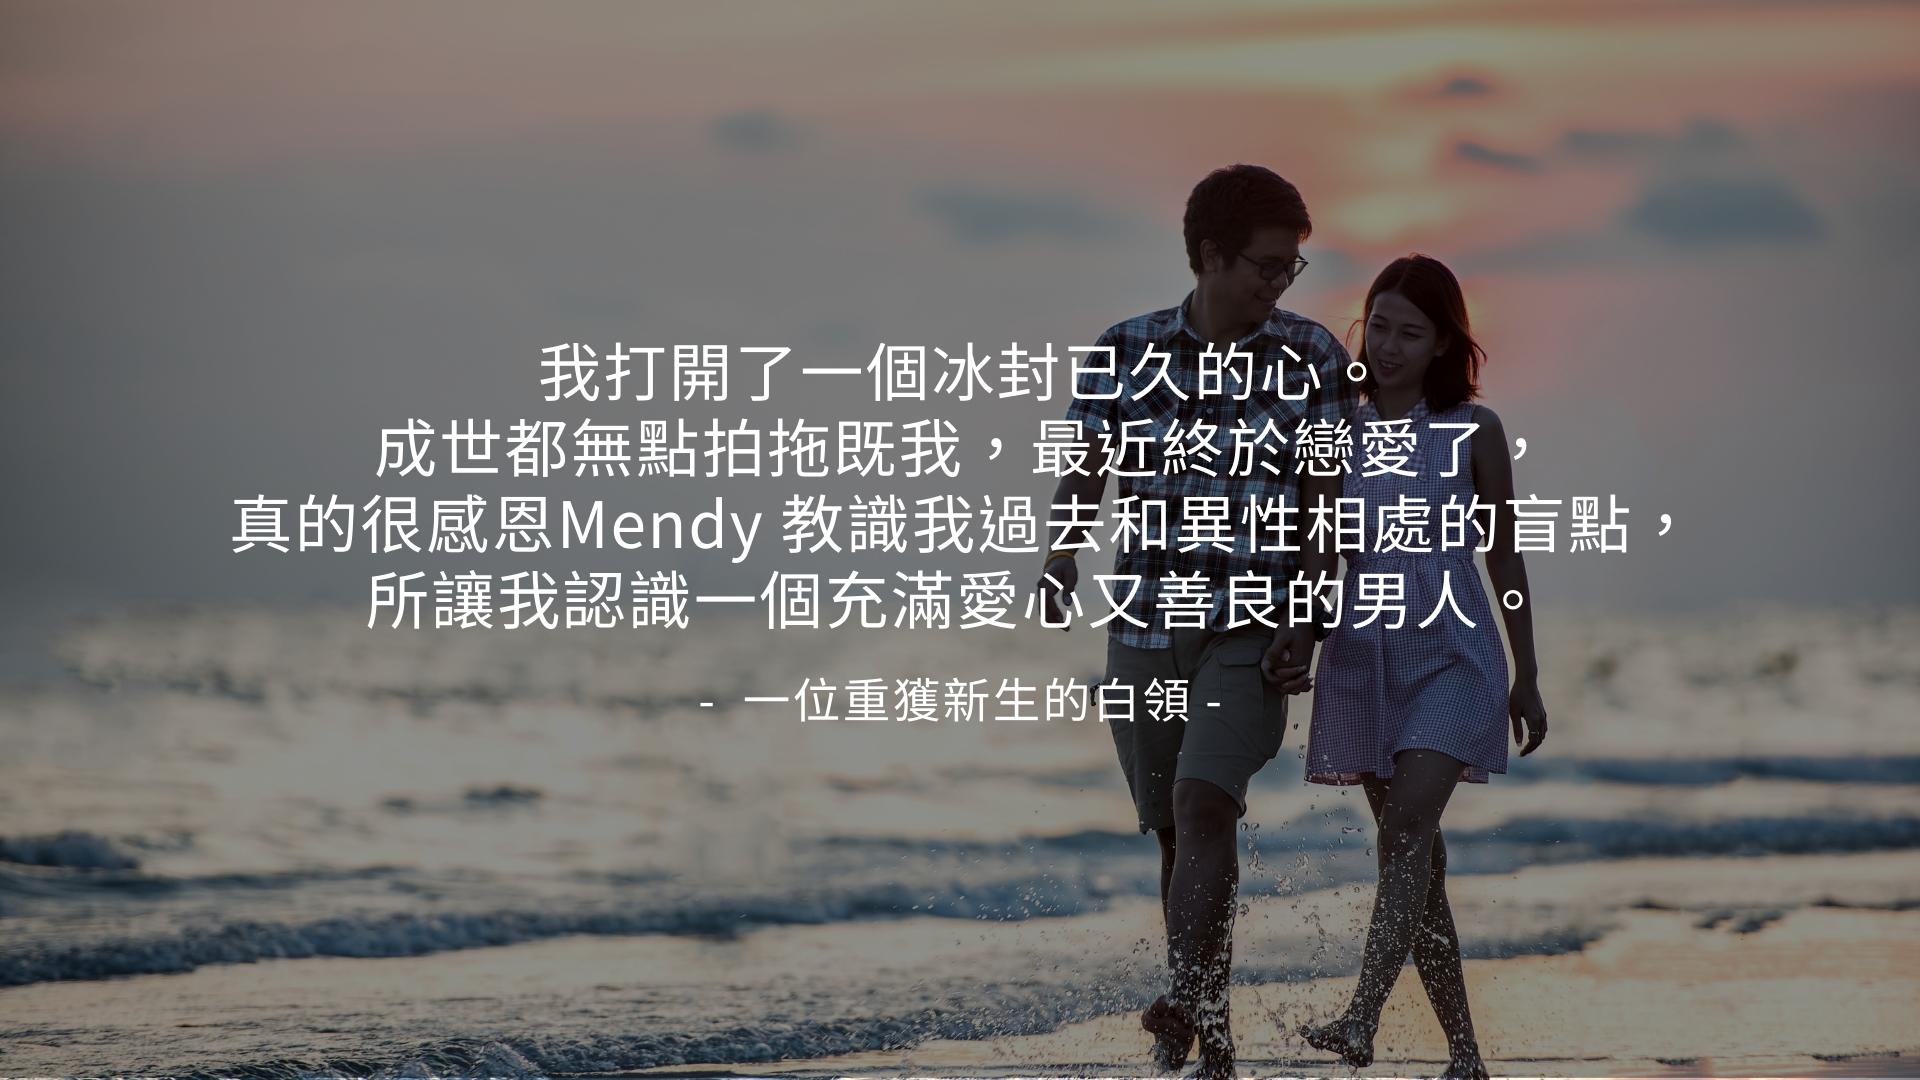 A couple walking on the beach with Chinese text, seeking guidance from a 心理醫生.